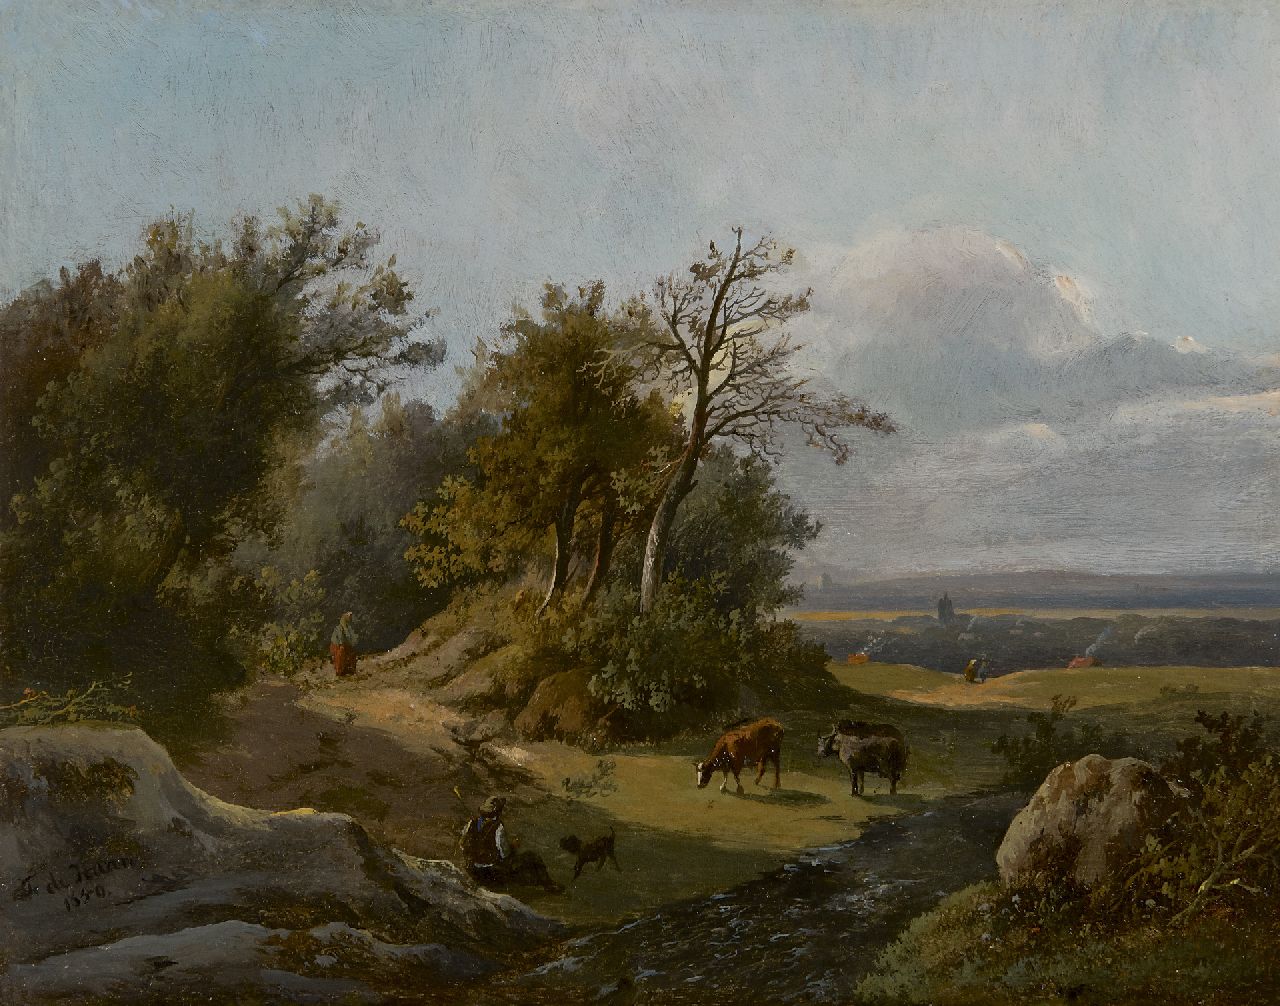 Haan F.A. de | Franciscus Antonius de Haan | Paintings offered for sale | A shepherd with his cattle in a hilly landscape, oil on panel 21.2 x 26.9 cm, signed l.l. and dated 1850